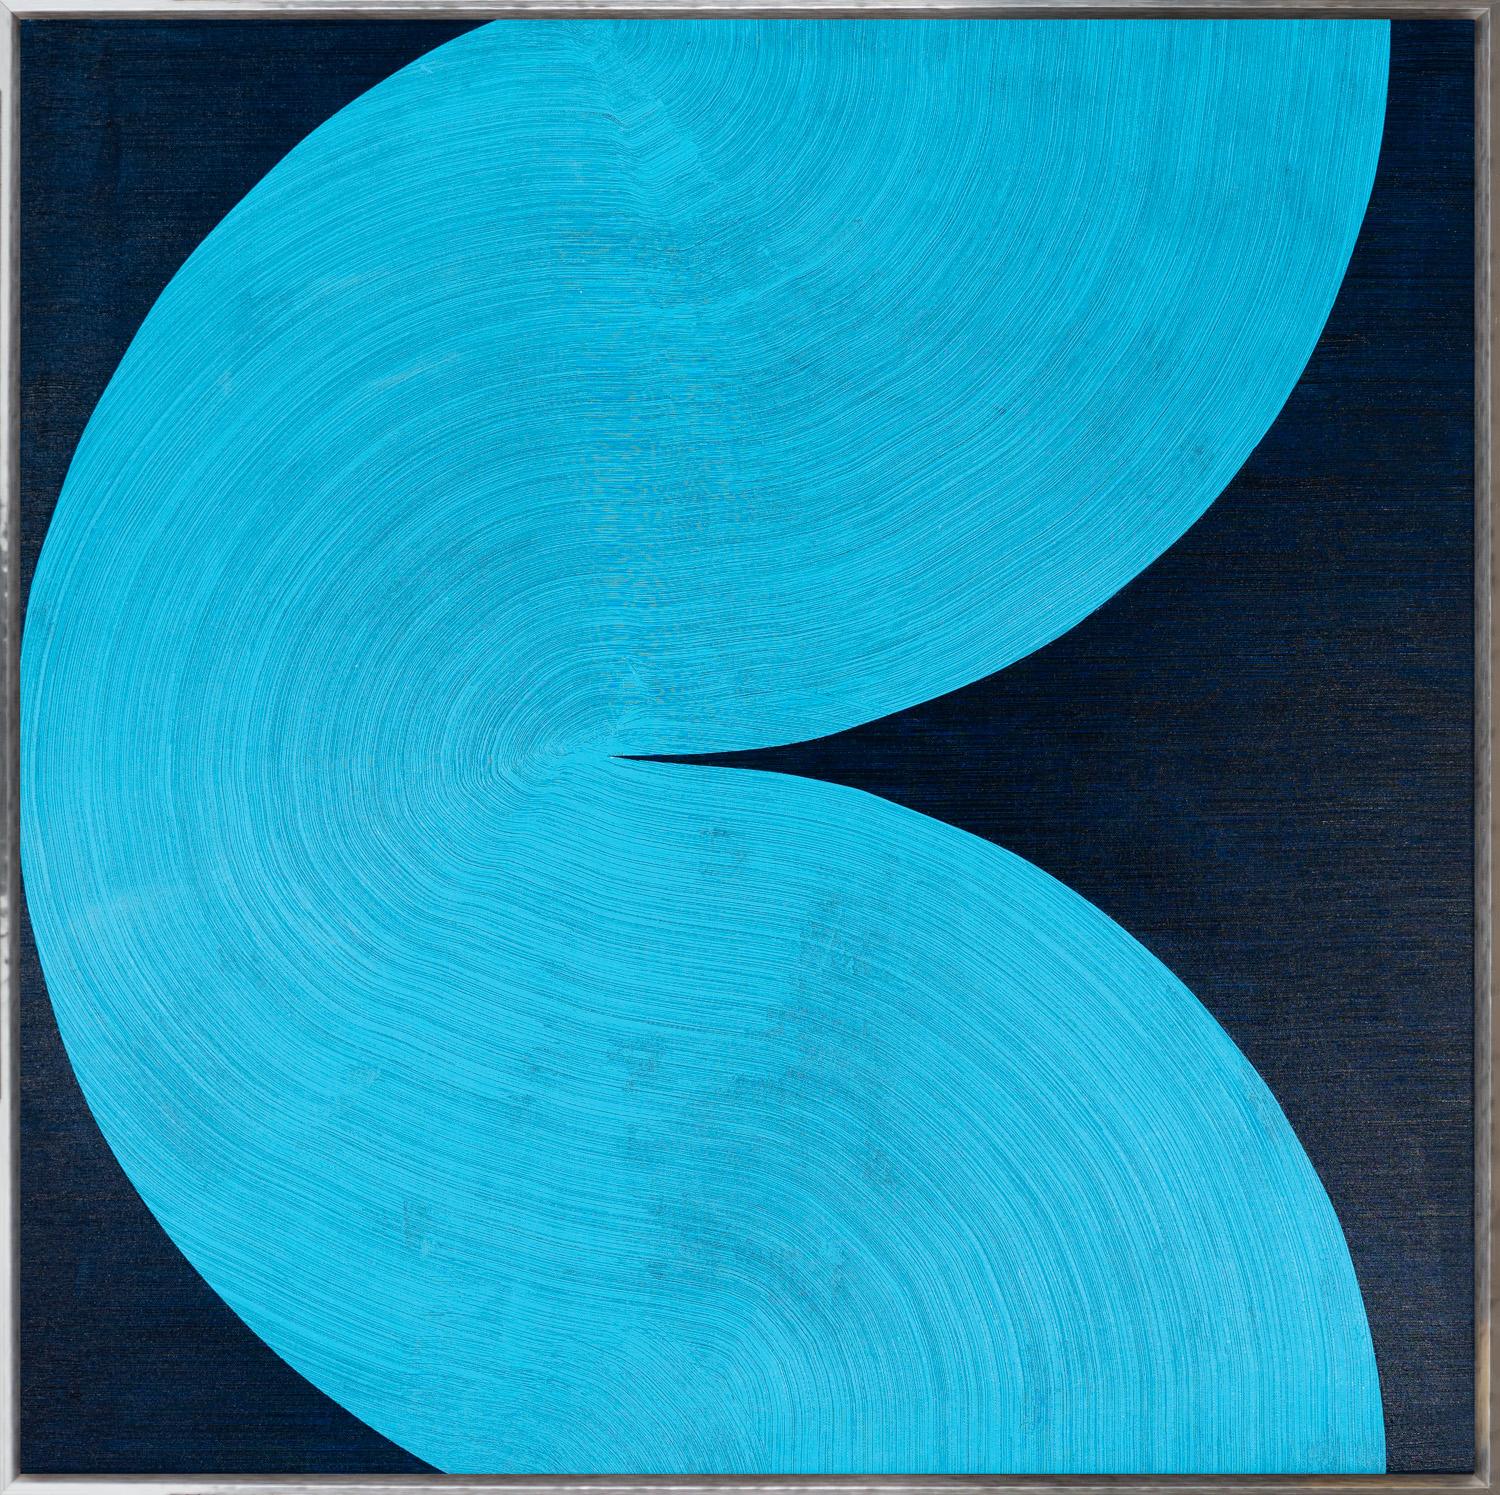 "Harmonia 30-5-II" is a framed acrylic painting on canvas by David Skillicorn, with a large abstract organic form in a dynamic shade of cerulean in a deep field of navy blue. 

This piece is finished in a silver floater frame with subtle beveling